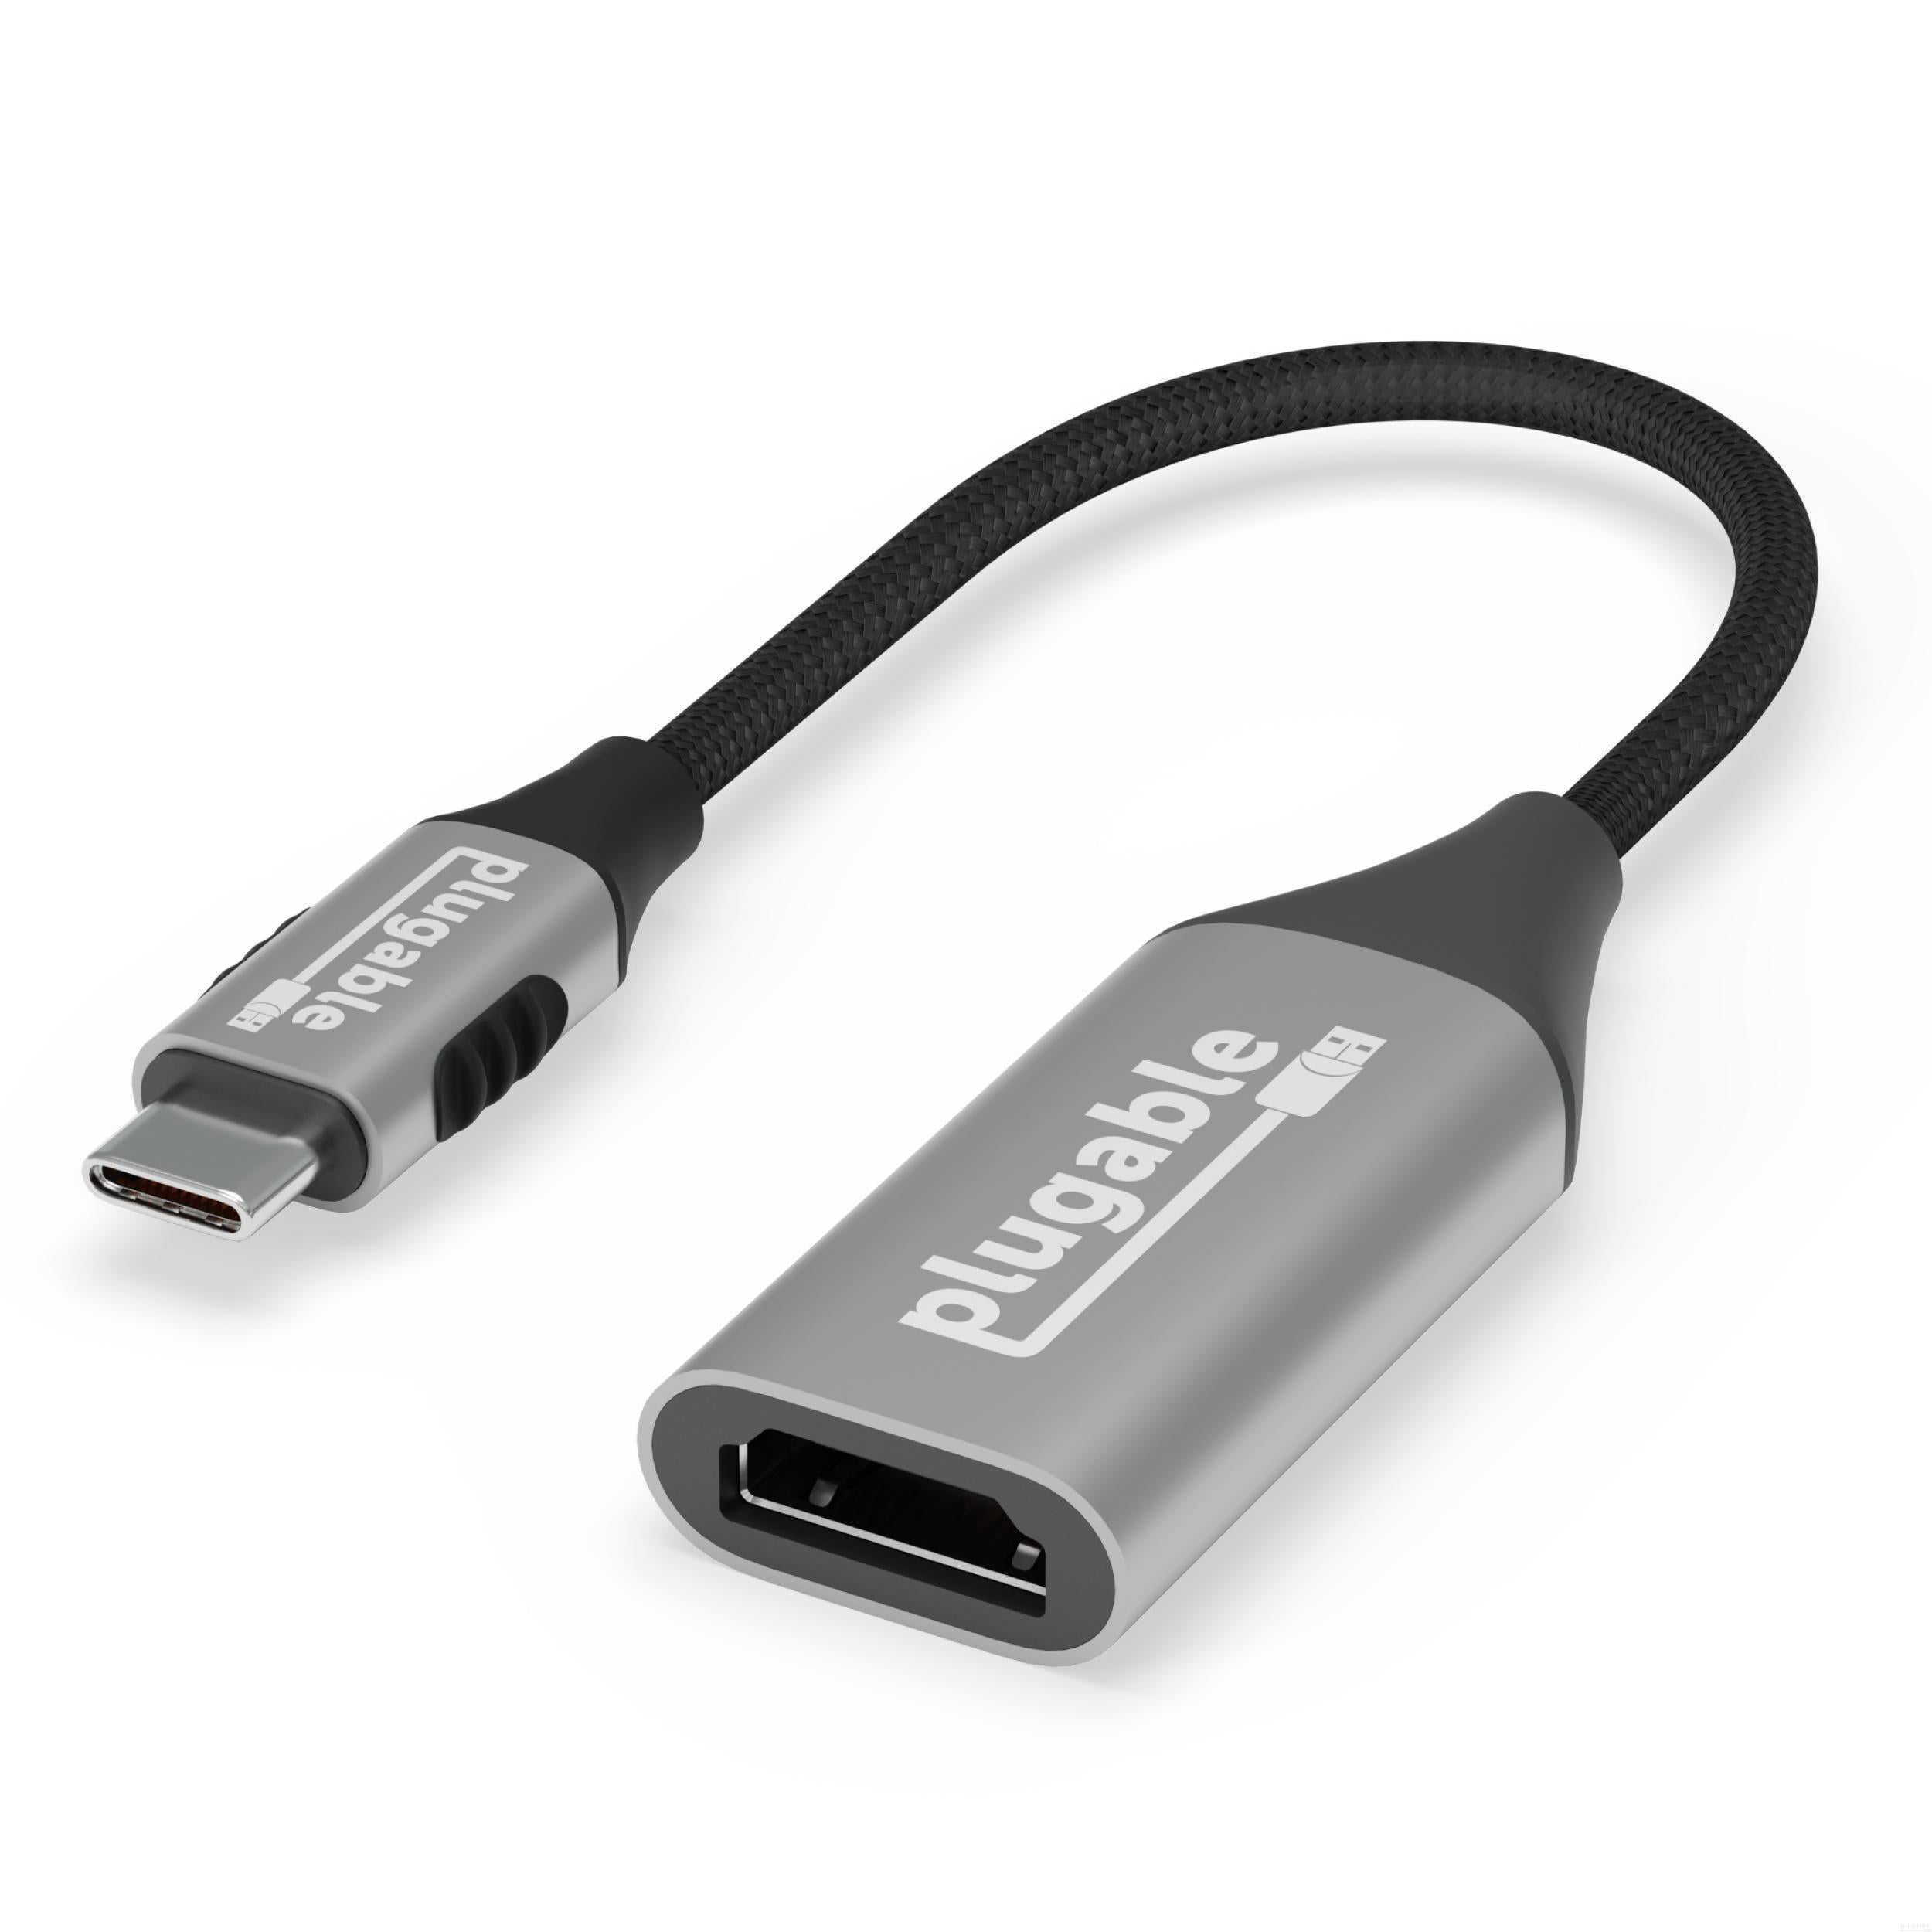 Plugable Active Mini DisplayPort Thunderbolt 2 to HDMI 2.0 Adapter Supports  Mac Windows Linux and Displays up to 4k UHD 3840x216060Hz - Office Depot